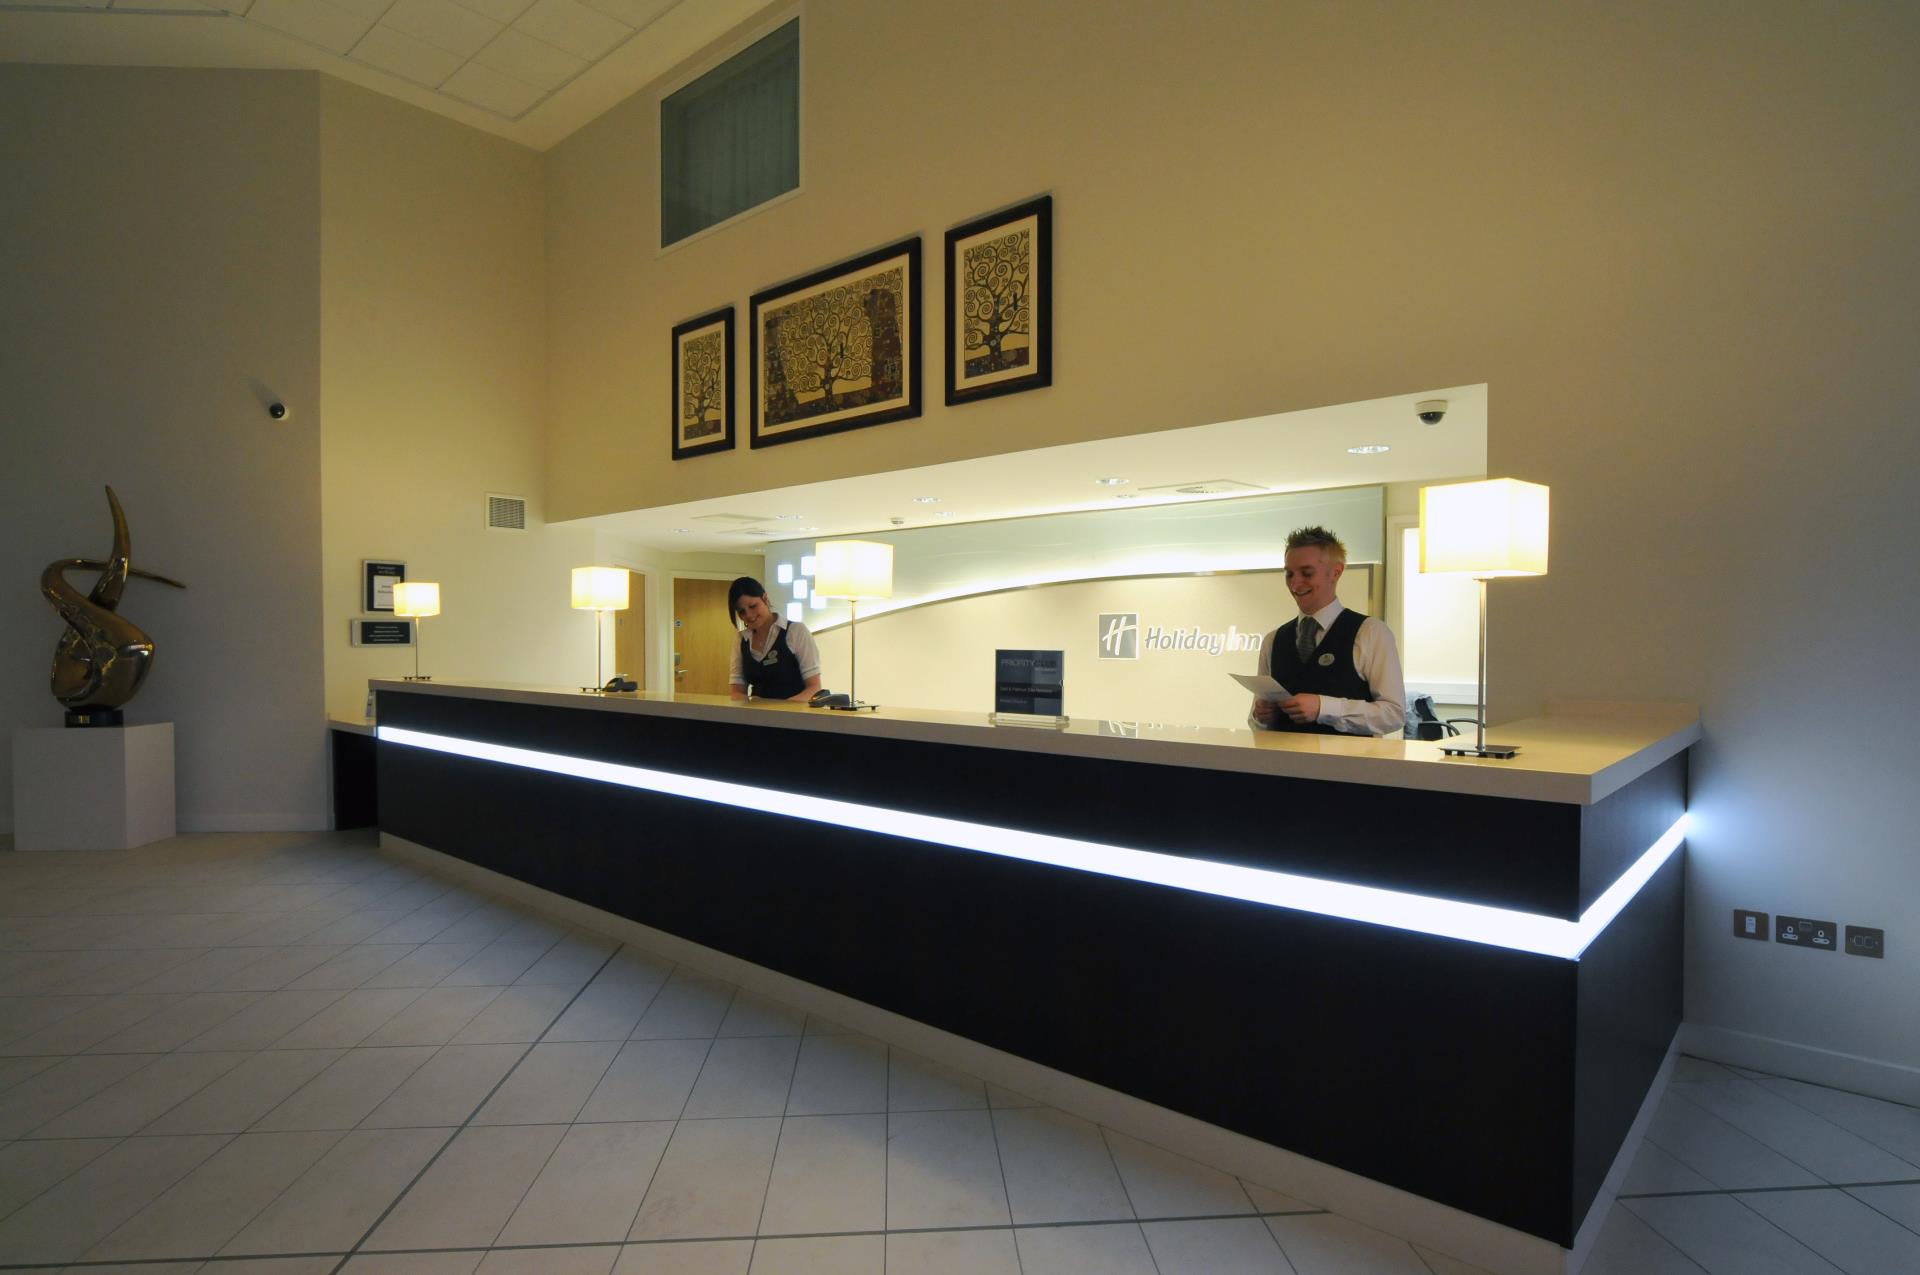 Picture of Holiday Inn Winchester - Reception